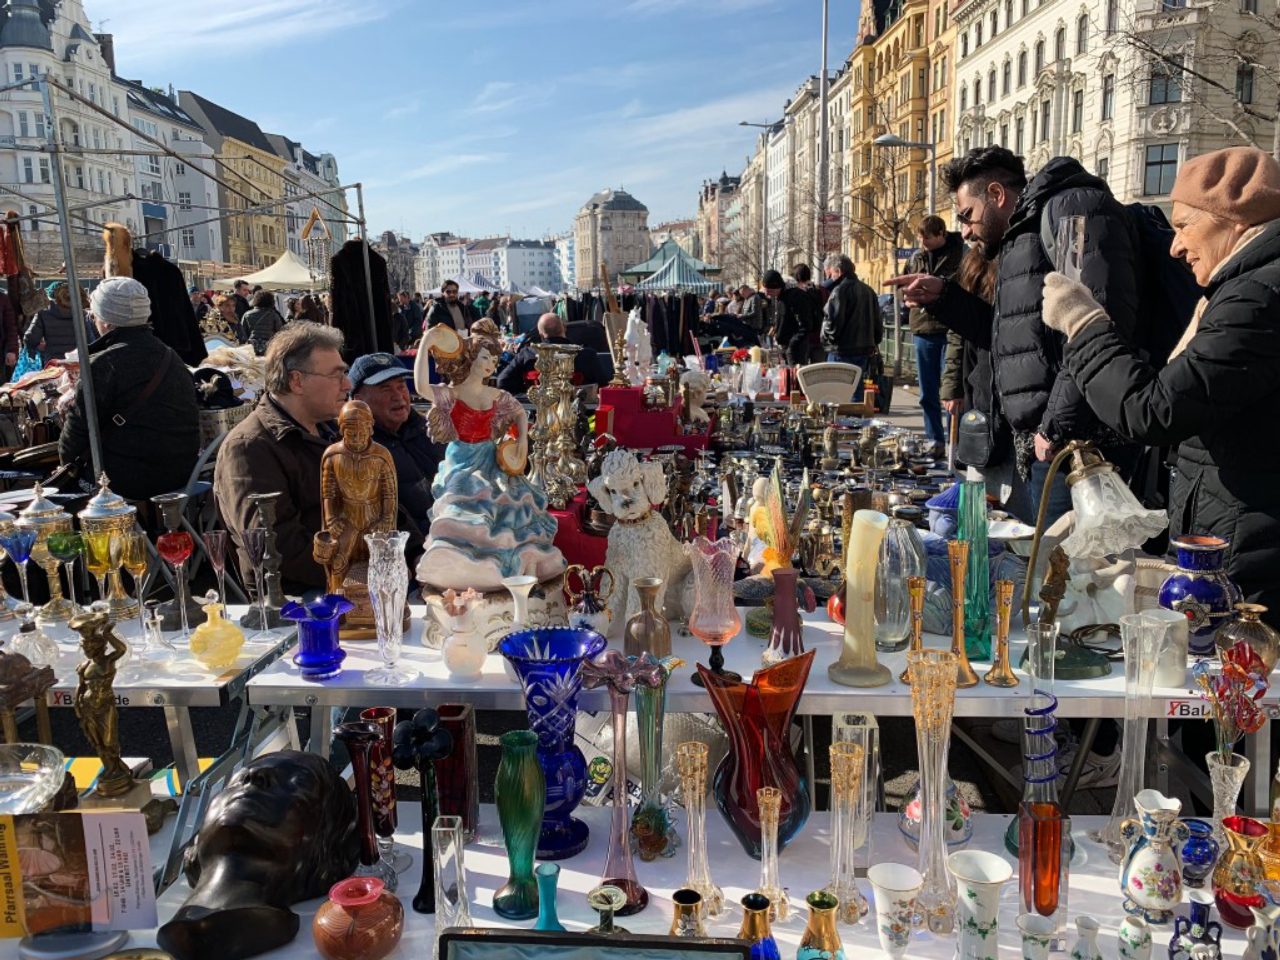 Vienna, Austria - February 16, 2018: every saturday is the biggest flea market of Vienna at the popular Naschmarkt aerea. Locals and lots of tourists are looking for bargains on this busy flea market.